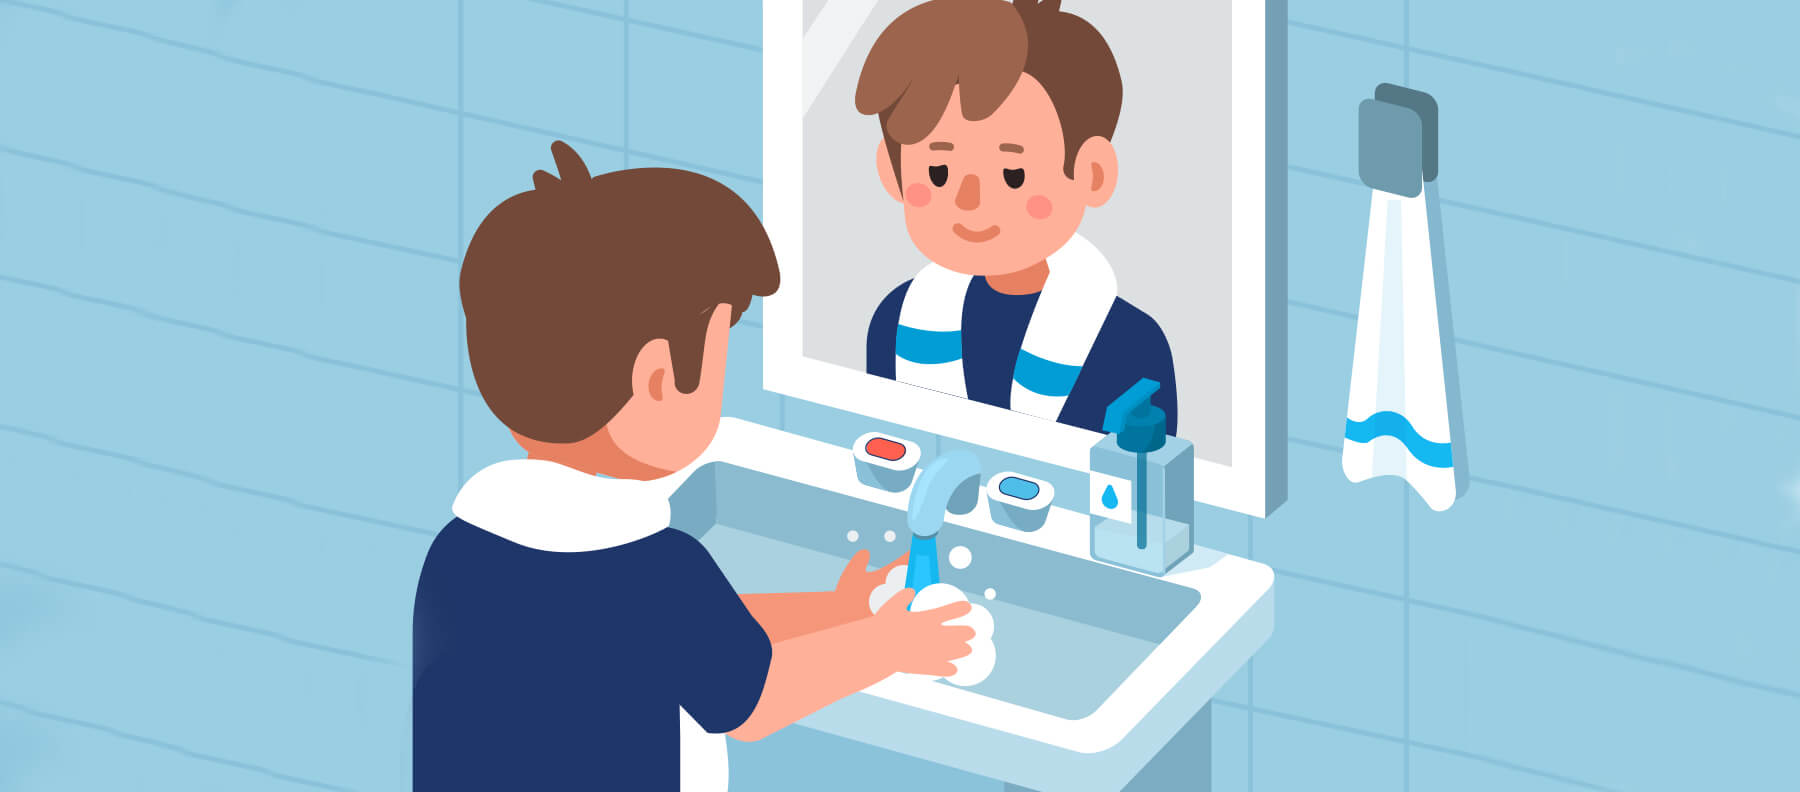 The 5 times you must wash your hands